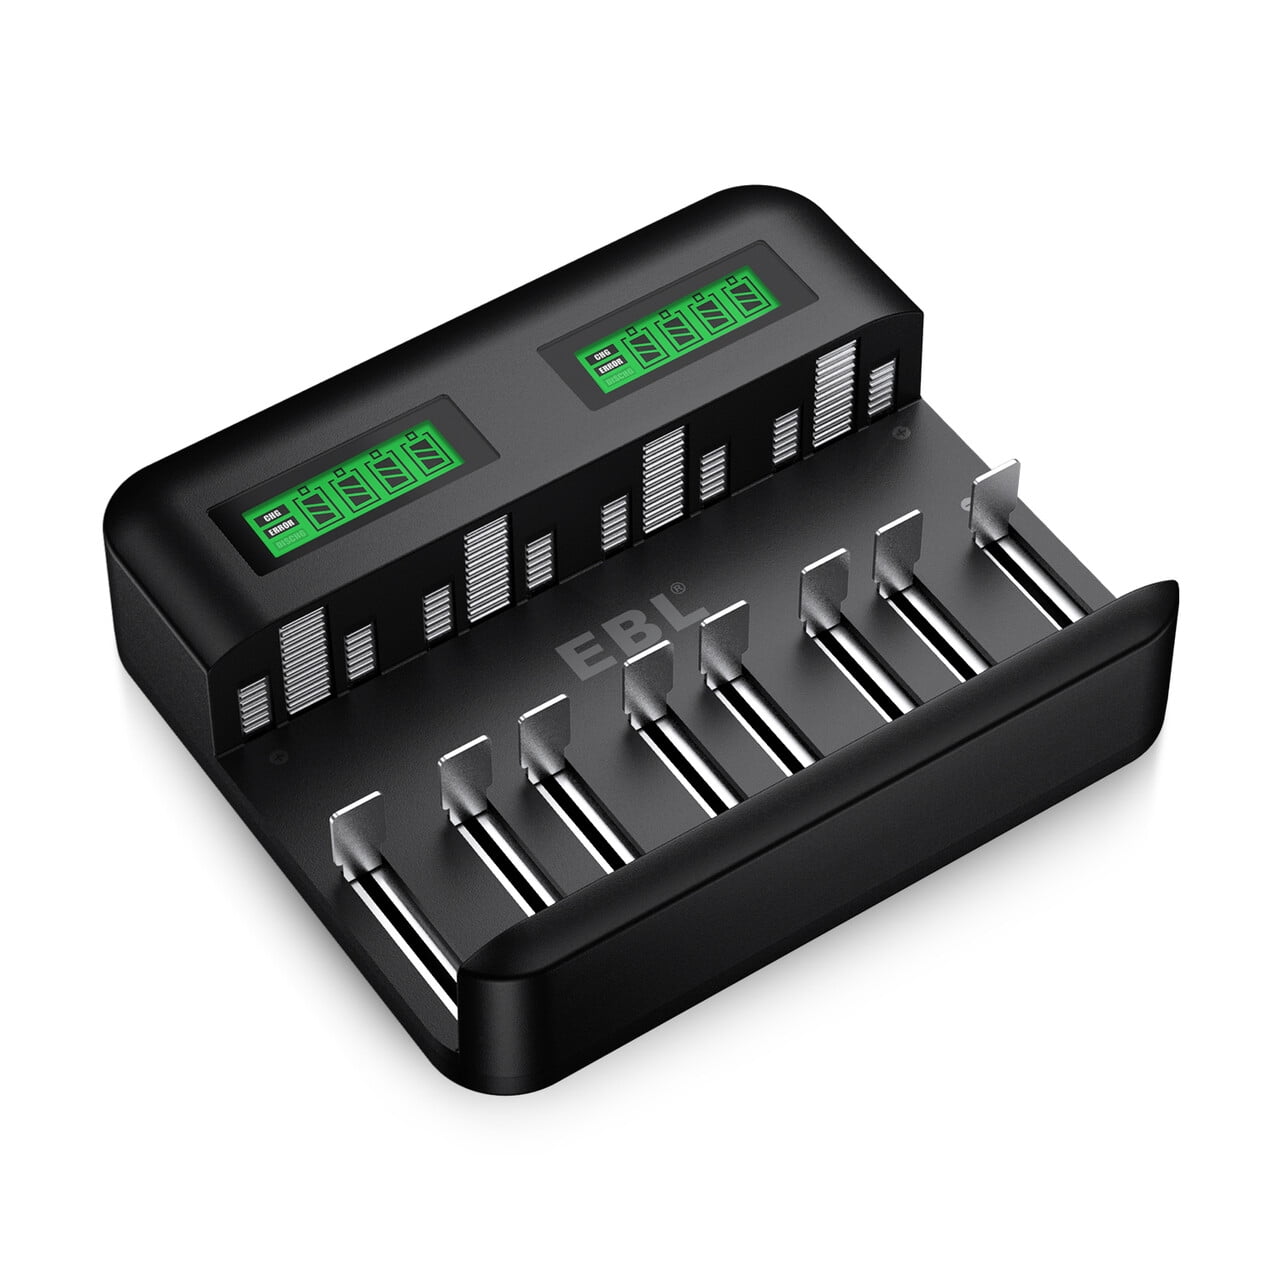 Intelligent Battery Detection Technology AA AAA Battery Charger 5V 2A Fast Charging Function HiQuick LCD 8-slot Battery Charger for AA /& AAA Rechargeable Batteries Type C and Micro USB Input